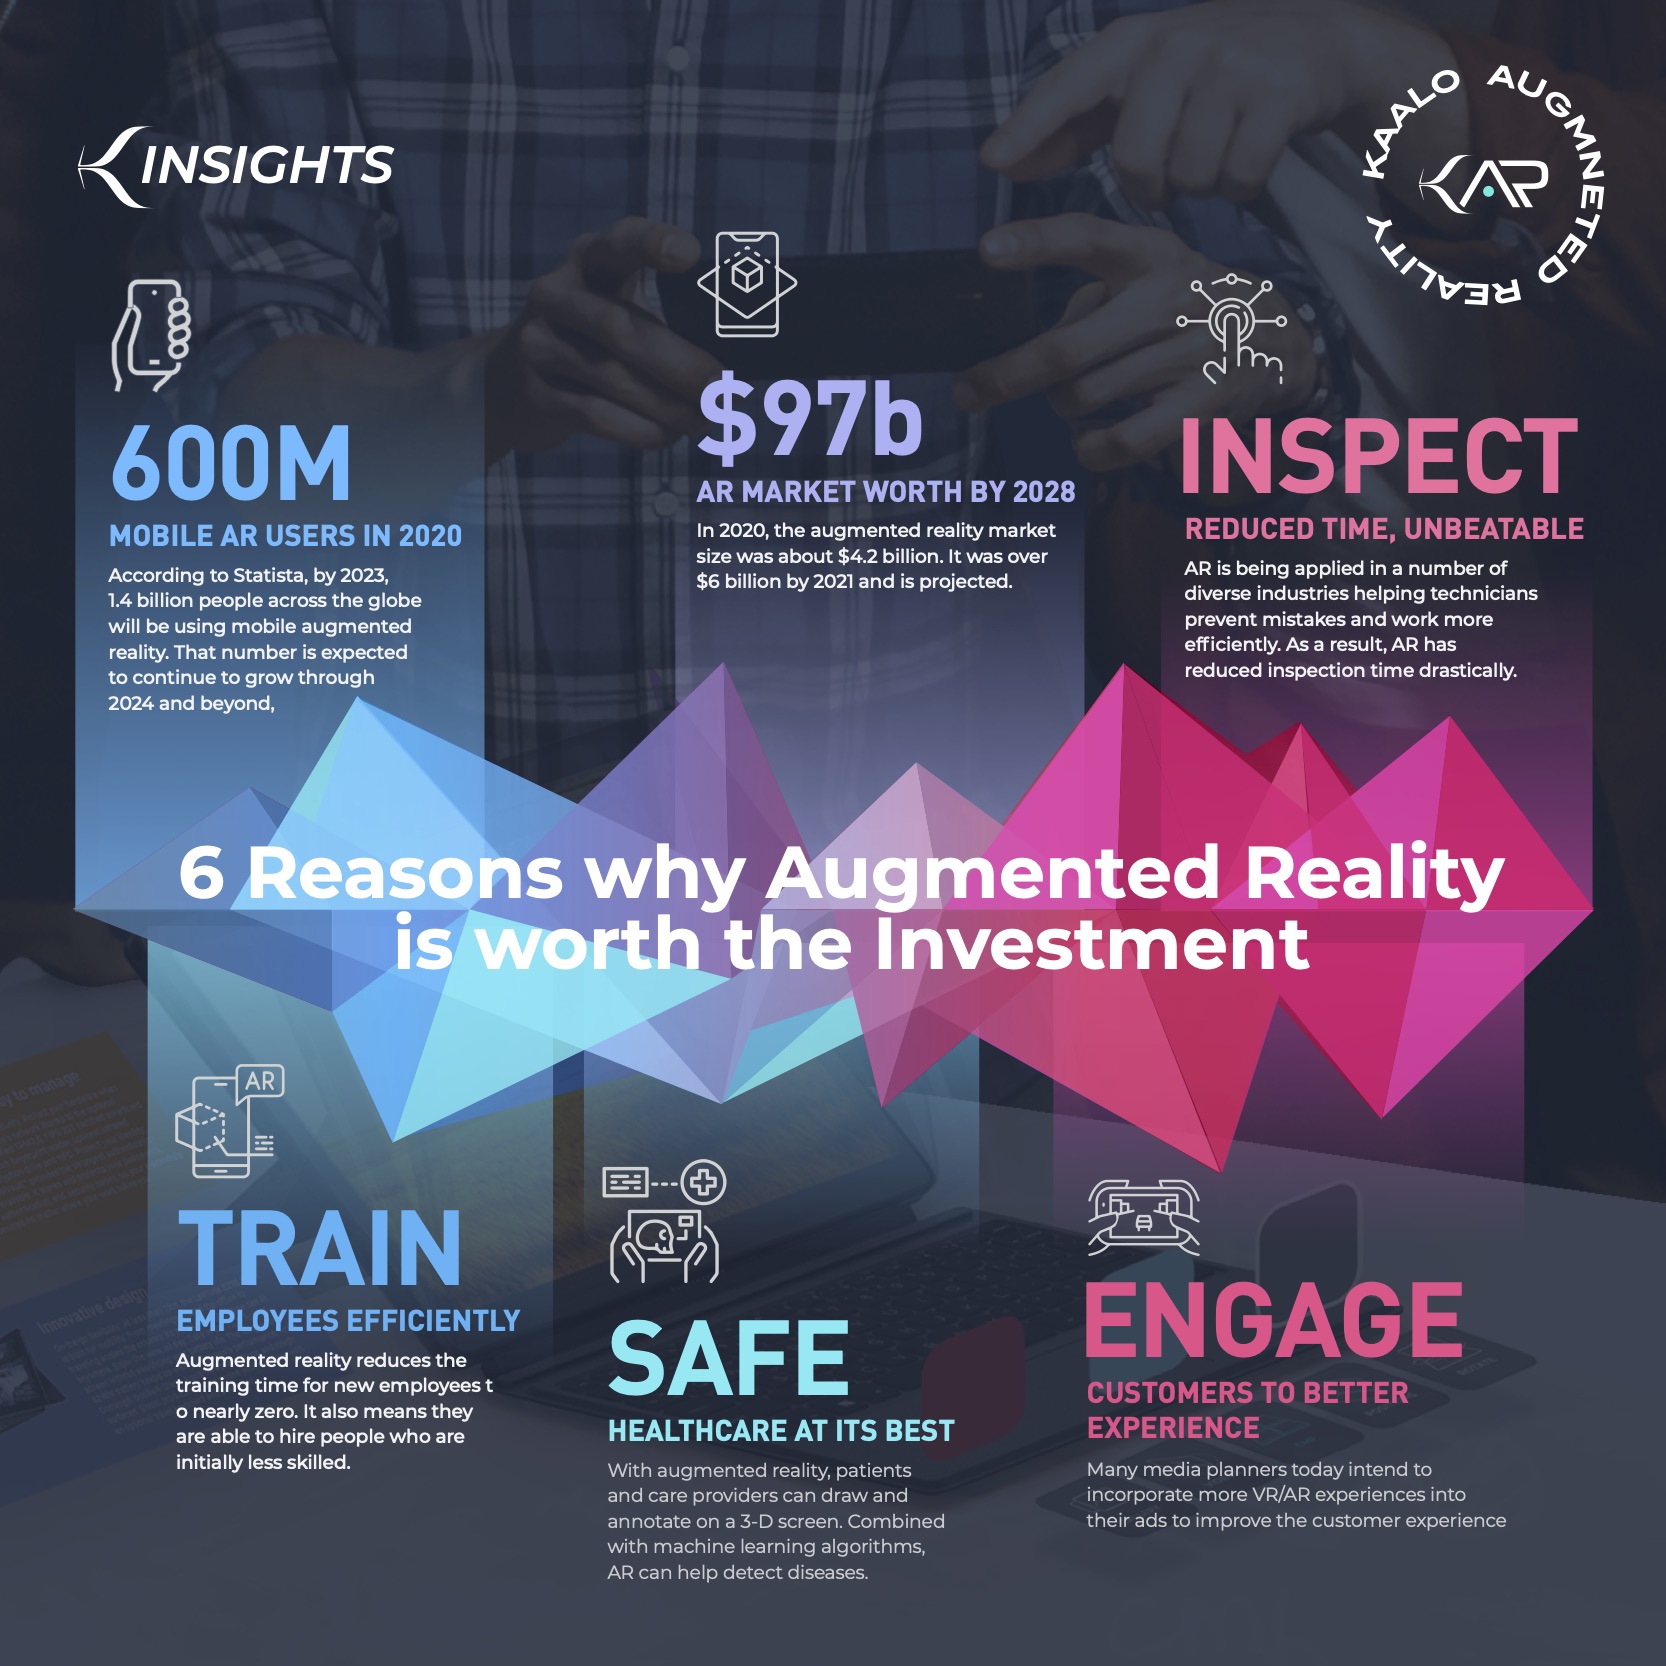 6 reasons augmented reality is worth it